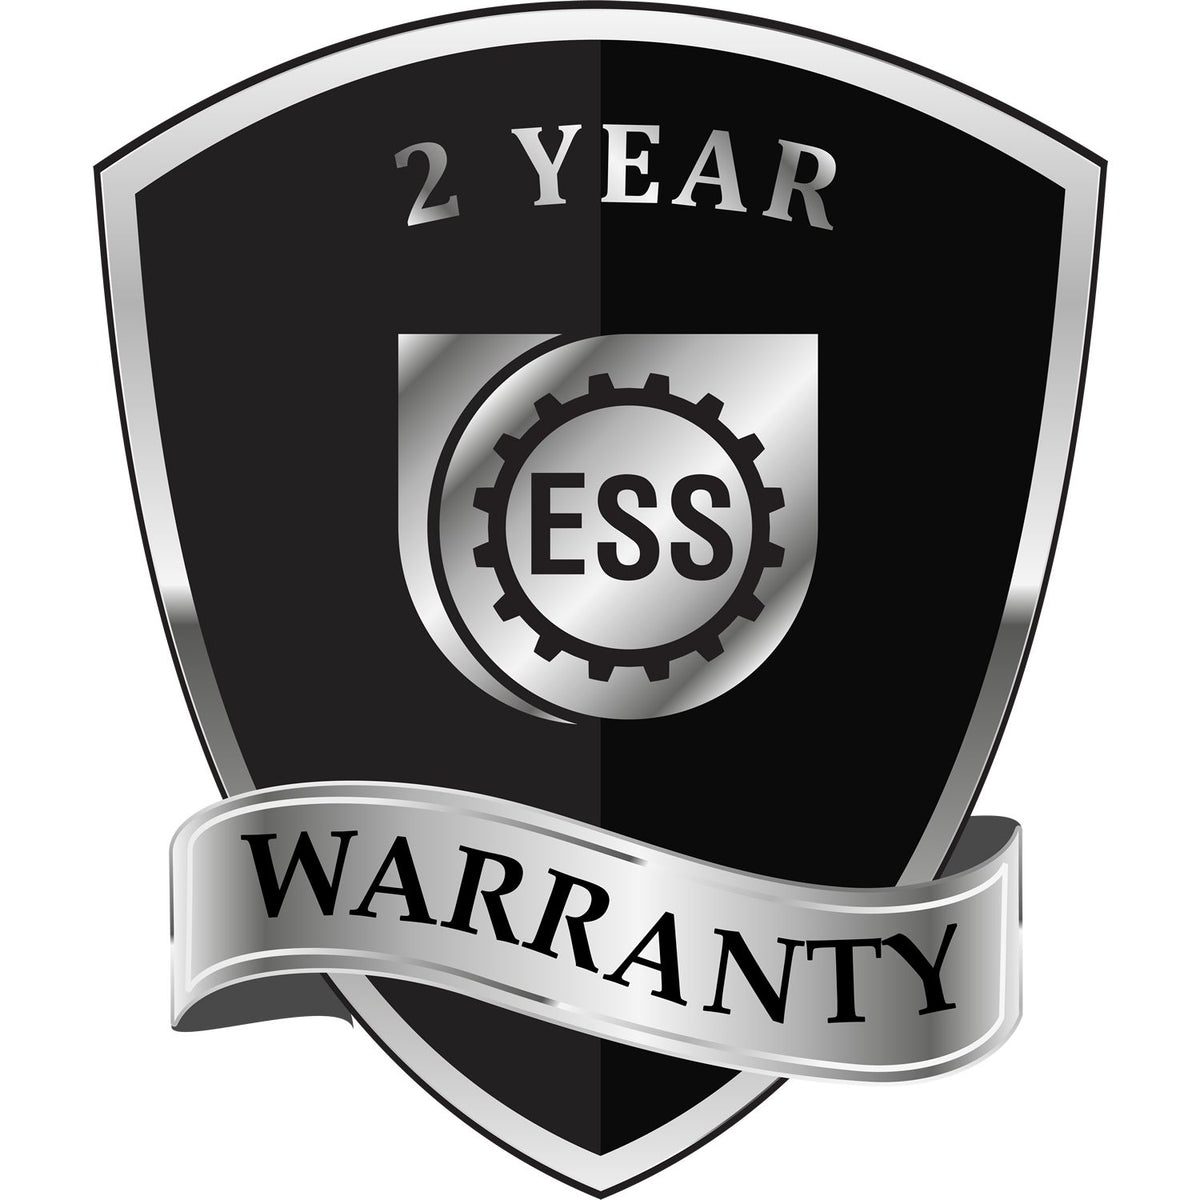 A badge or emblem showing a warranty icon for the State of Michigan Extended Long Reach Engineer Seal